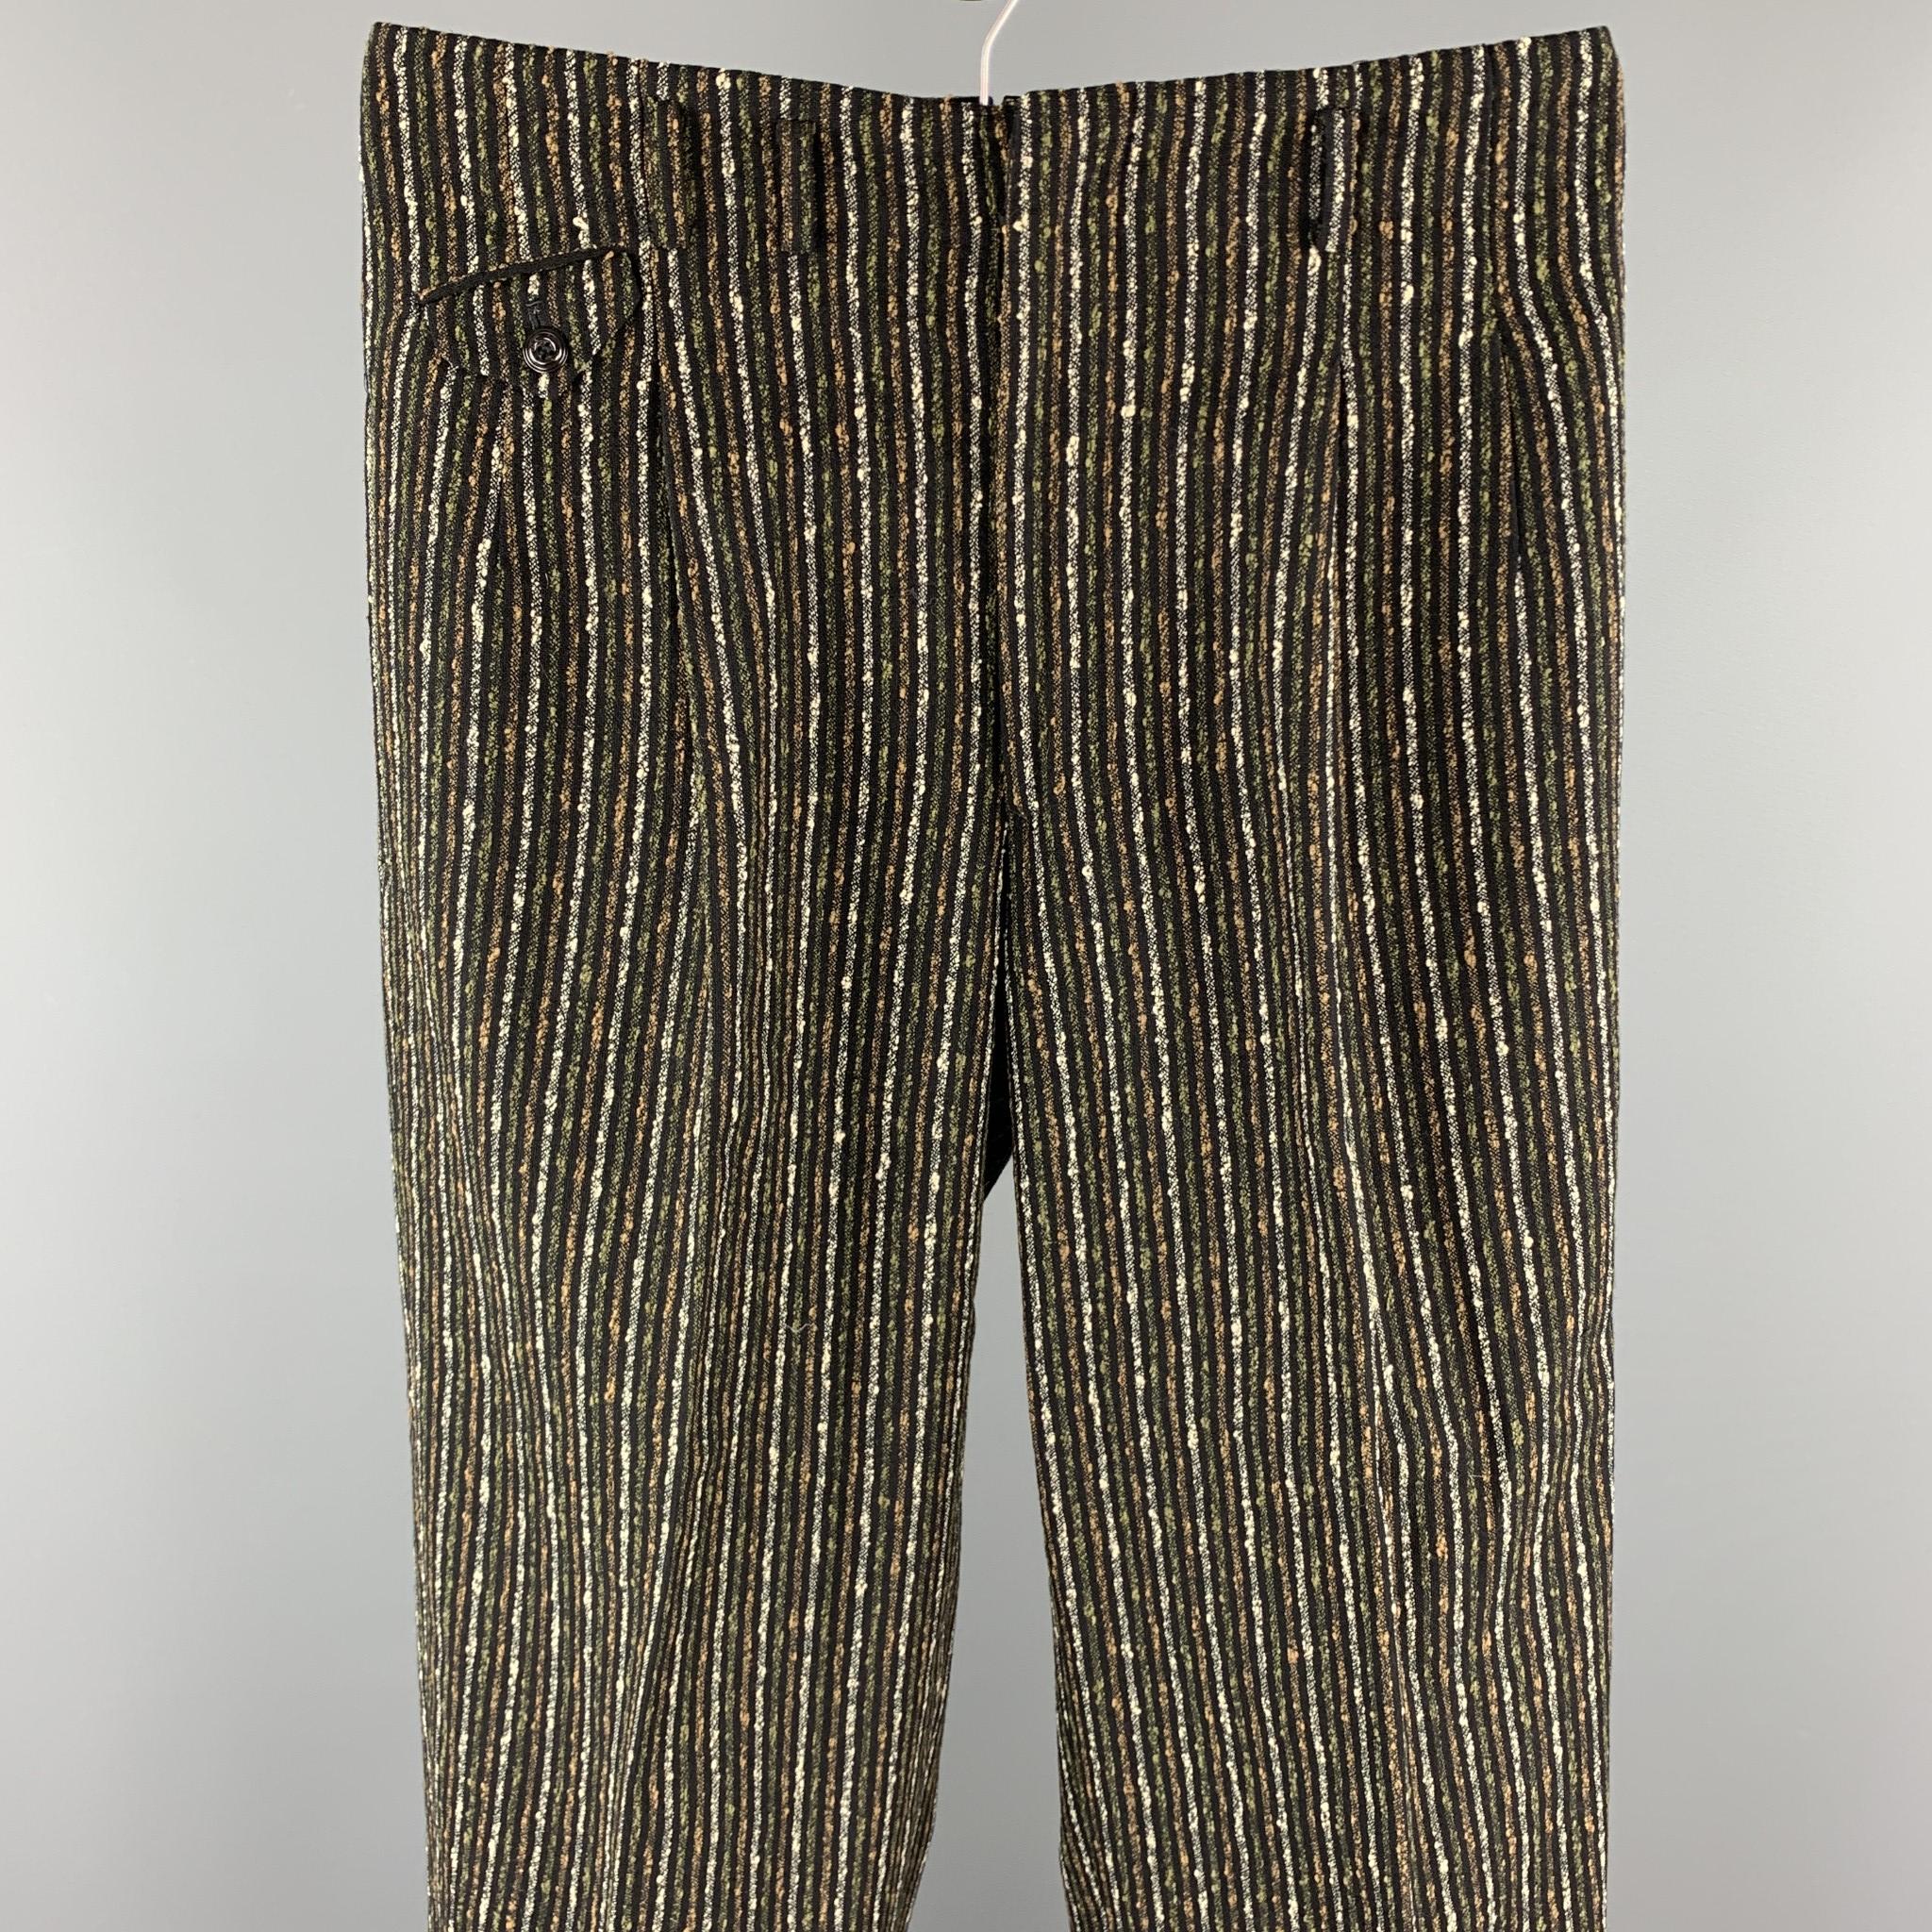 Vintage MATSUDA dress pants comes in a black & brown stripe wool blend featuring a pleated style and a zip fly closure. Made in Japan.

Excellent Pre-Owned Condition.
Marked: M

Measurements:

Waist: 32 in. 
Rise: 8.5 in.
Inseam: 32 in. 

